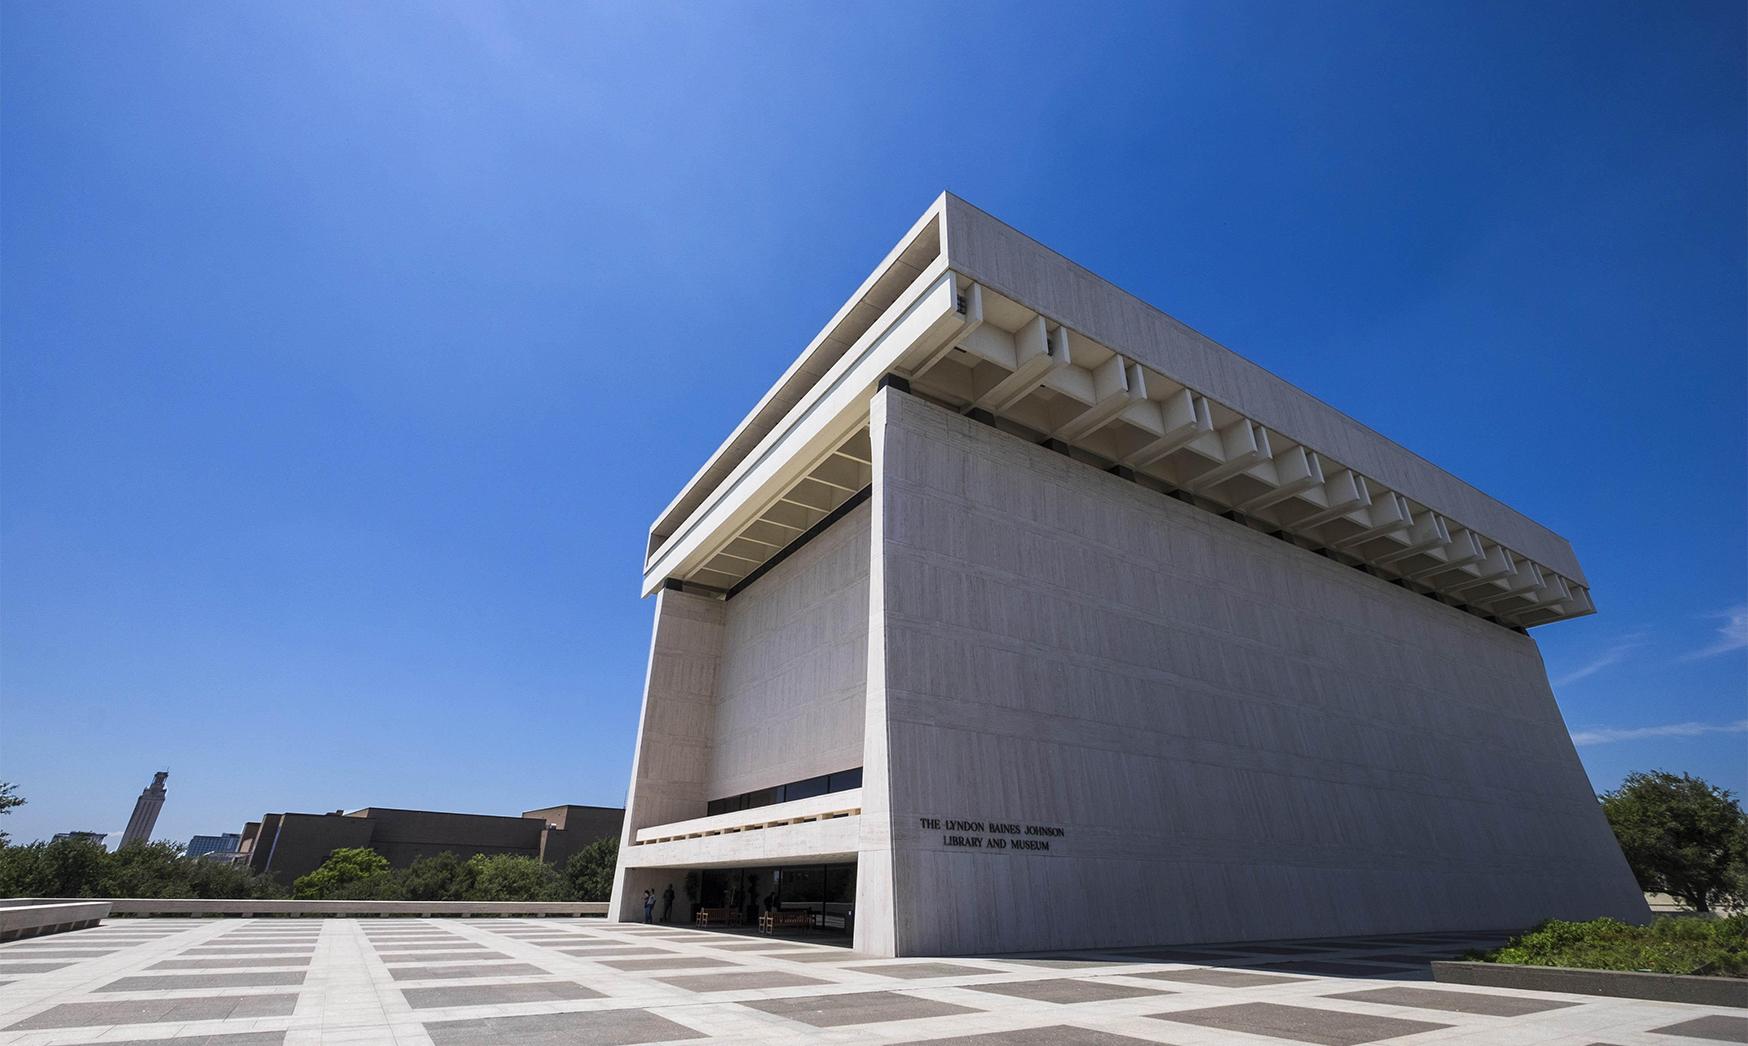 A view of the LBJ Library from its plaza